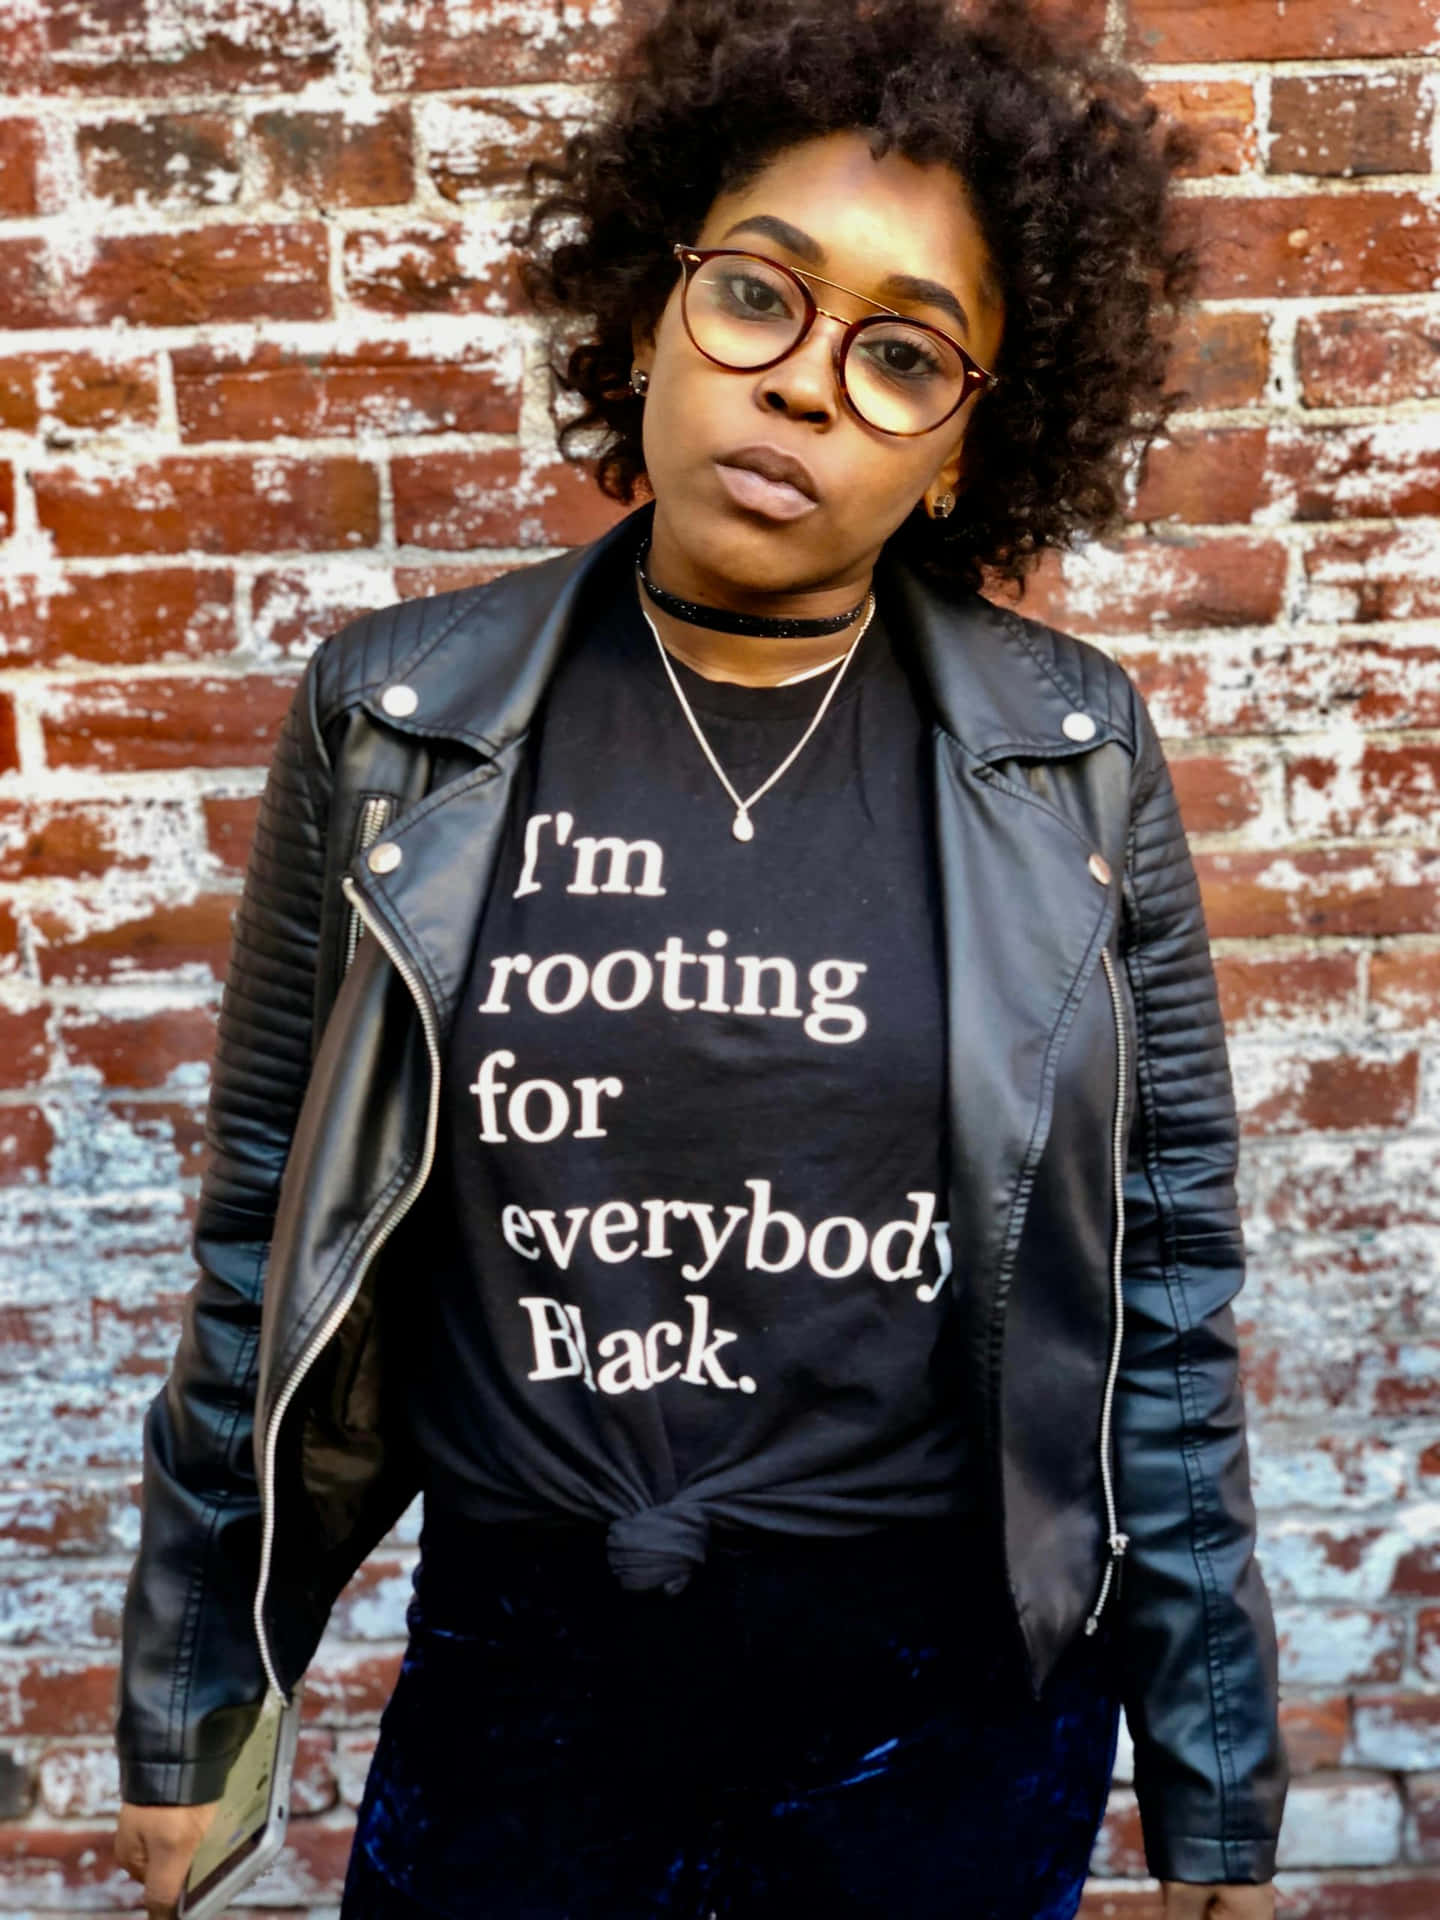 Rooting For Everybody Black_ T Shirt_ Woman Brick Wall Wallpaper